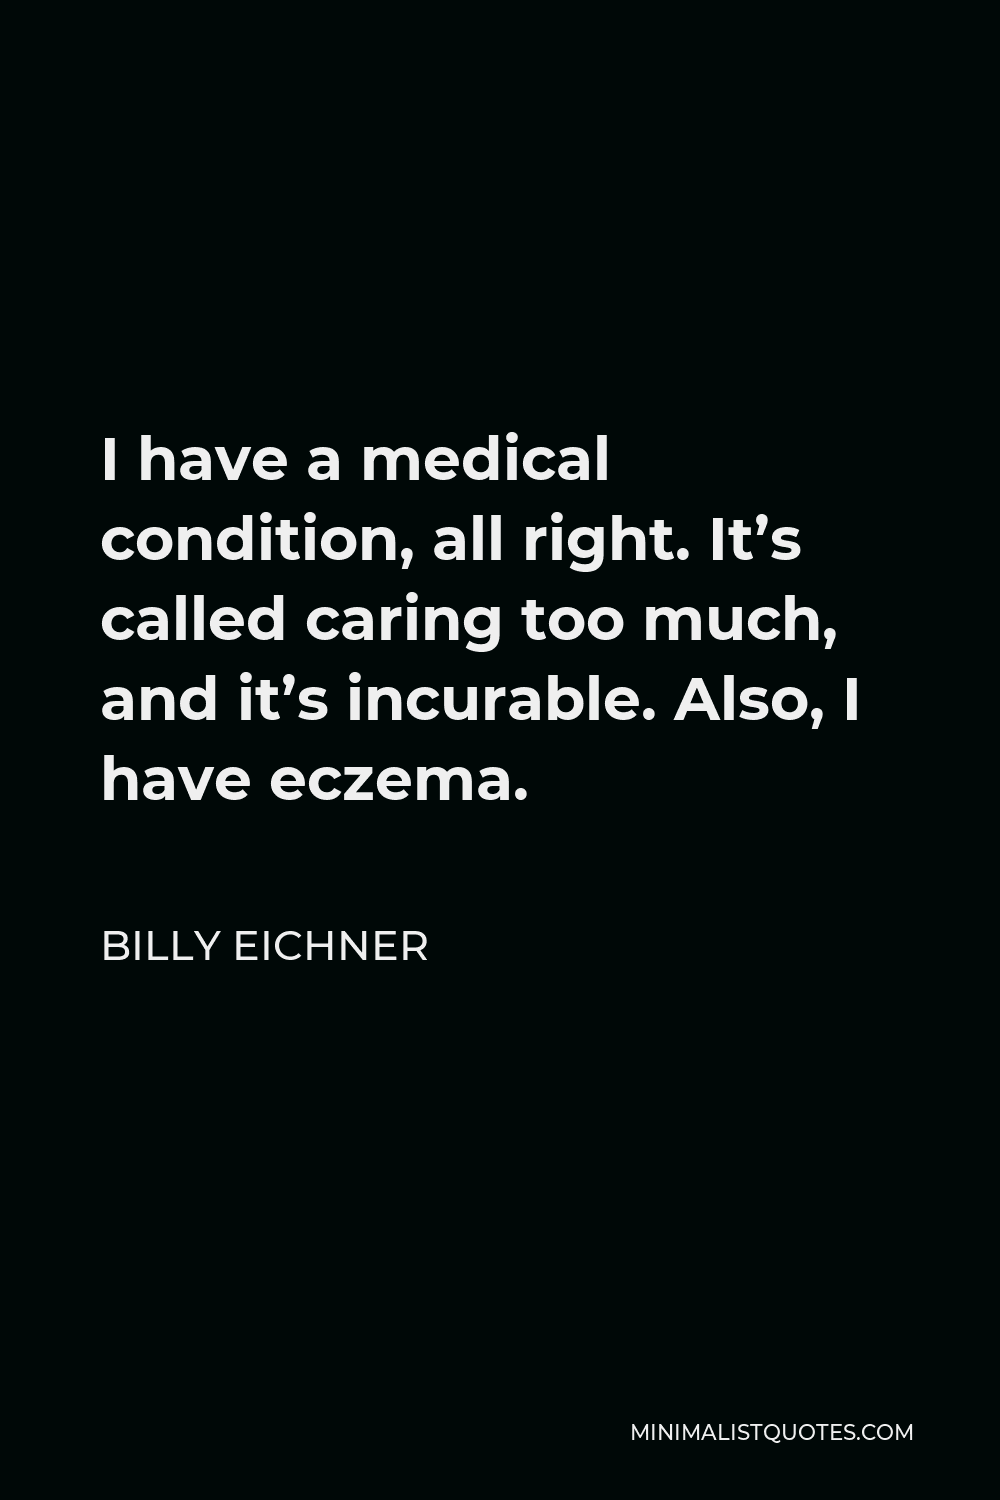 Billy Eichner Quote - I have a medical condition, all right. It’s called caring too much, and it’s incurable. Also, I have eczema.